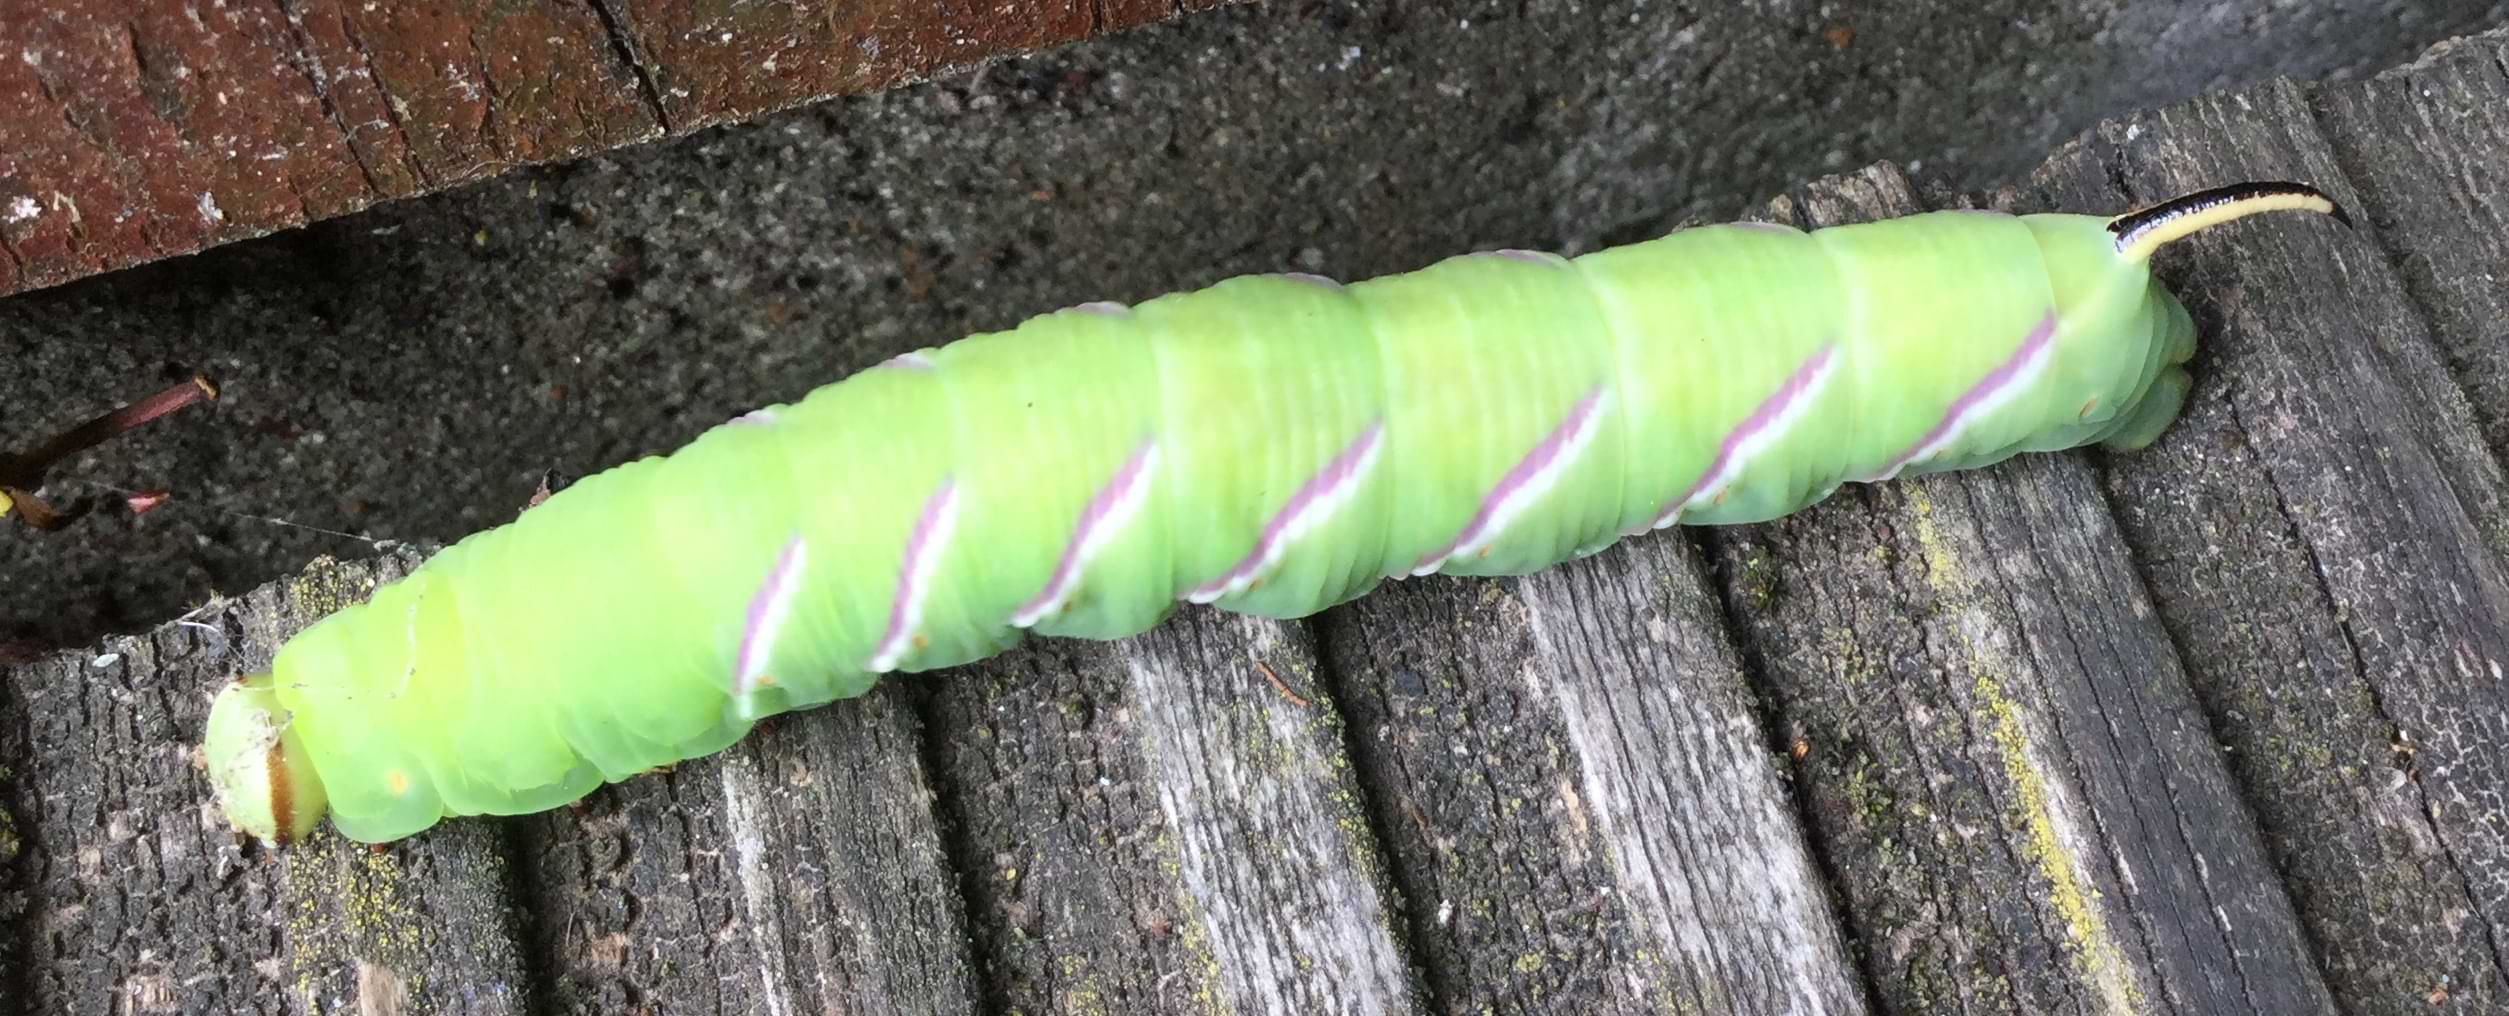 A bright green caterpillar with pink and white stripes running up its side and a sharp point at the end of its body.